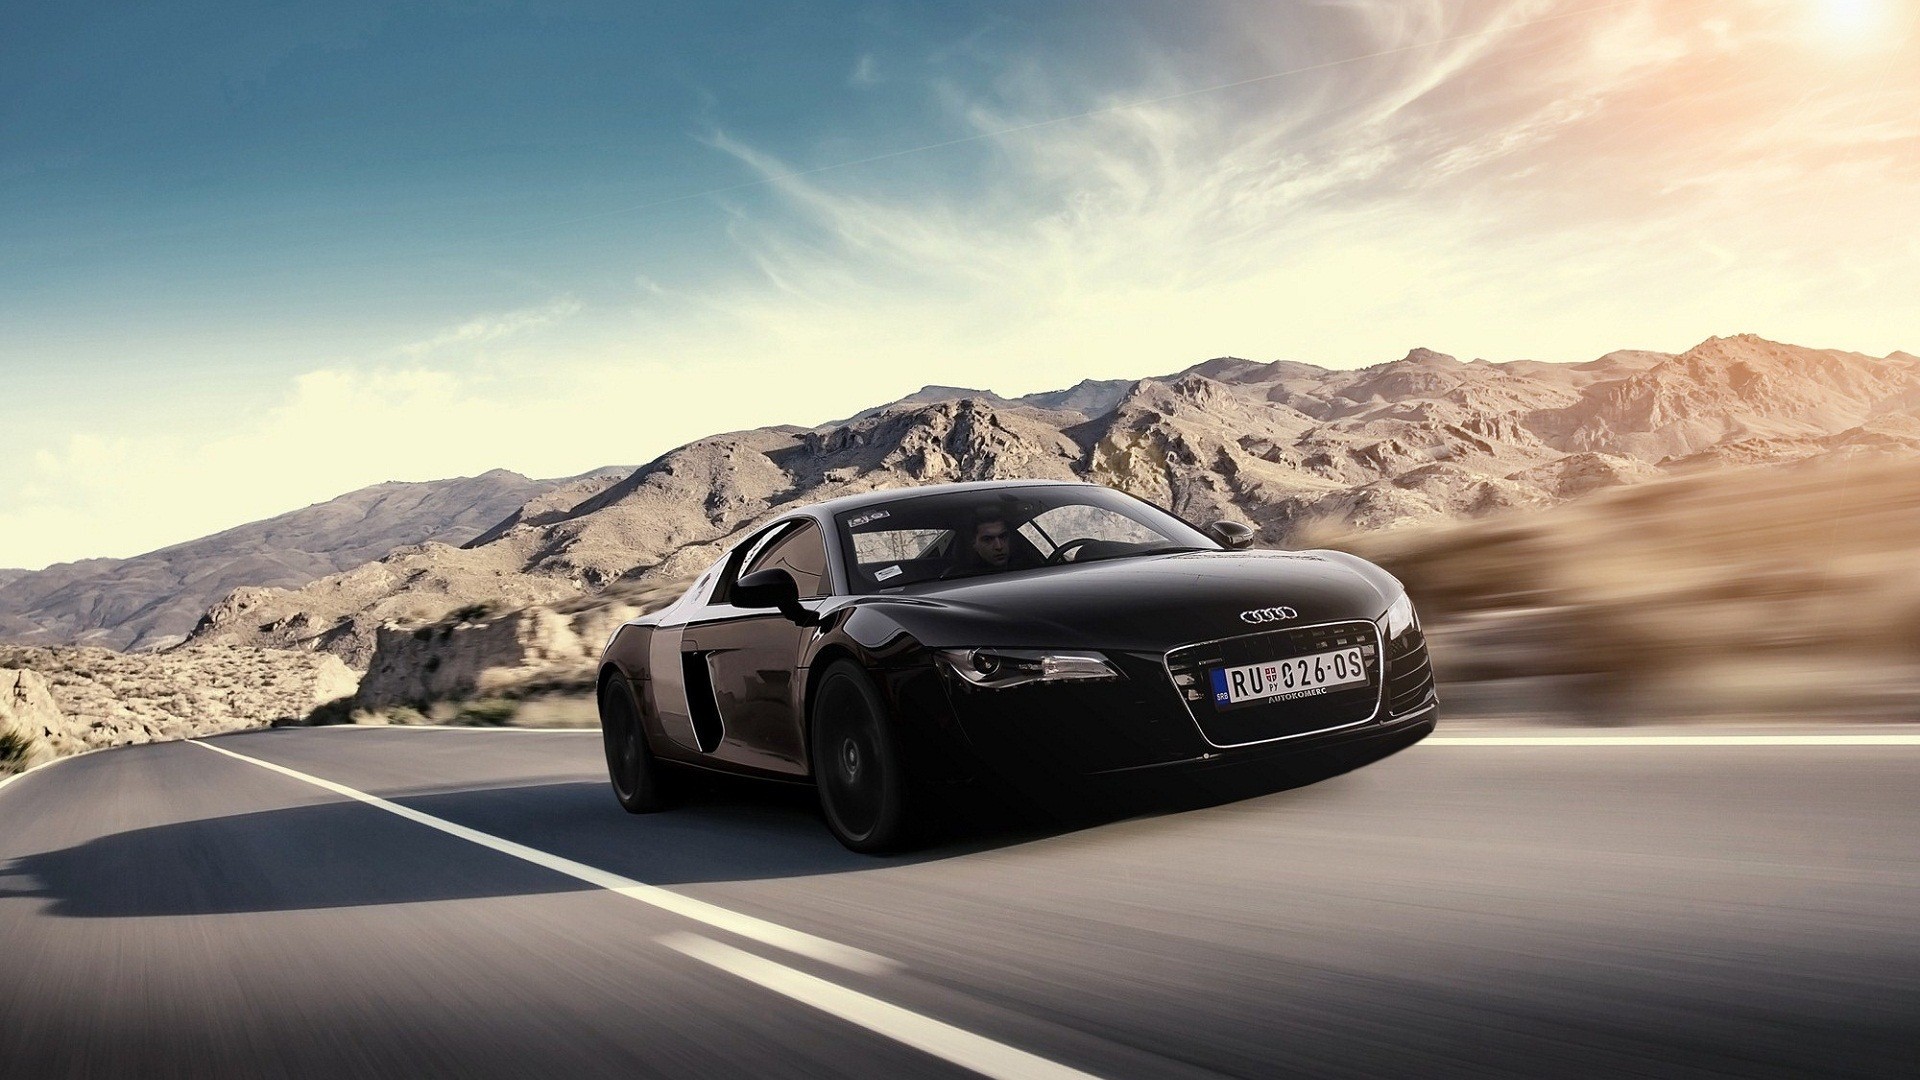 1920x1080 Audi R Wallpapers Picture HD Car Wallpaper Car to Drive